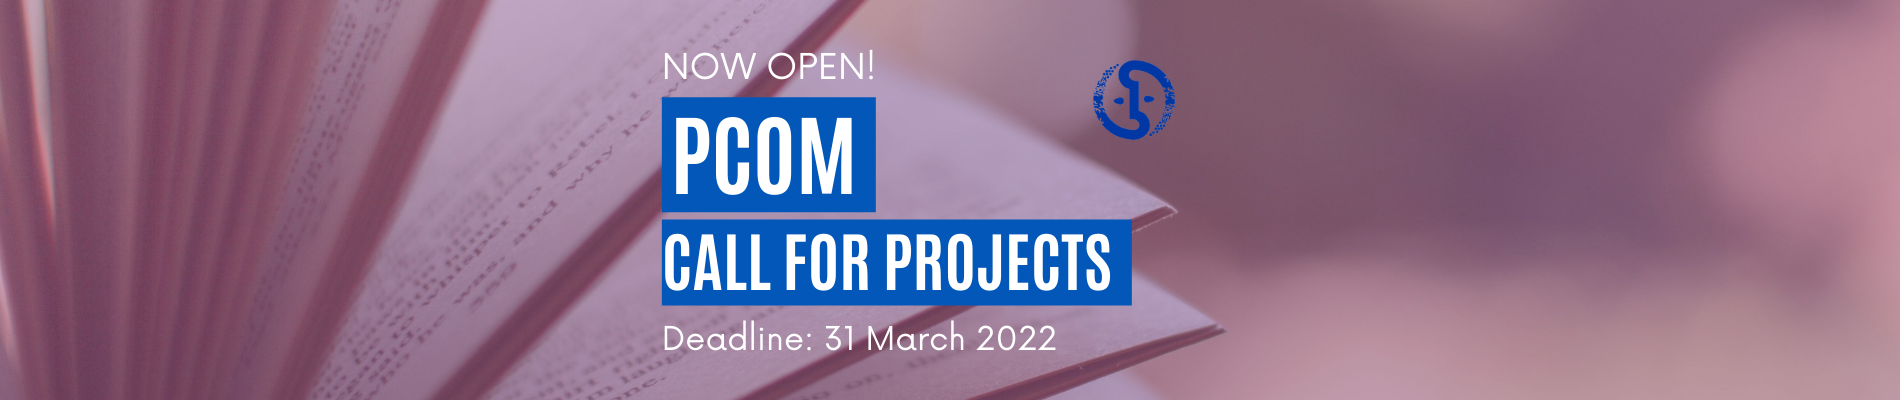 2022_pcom_call_for_projects_open_eng